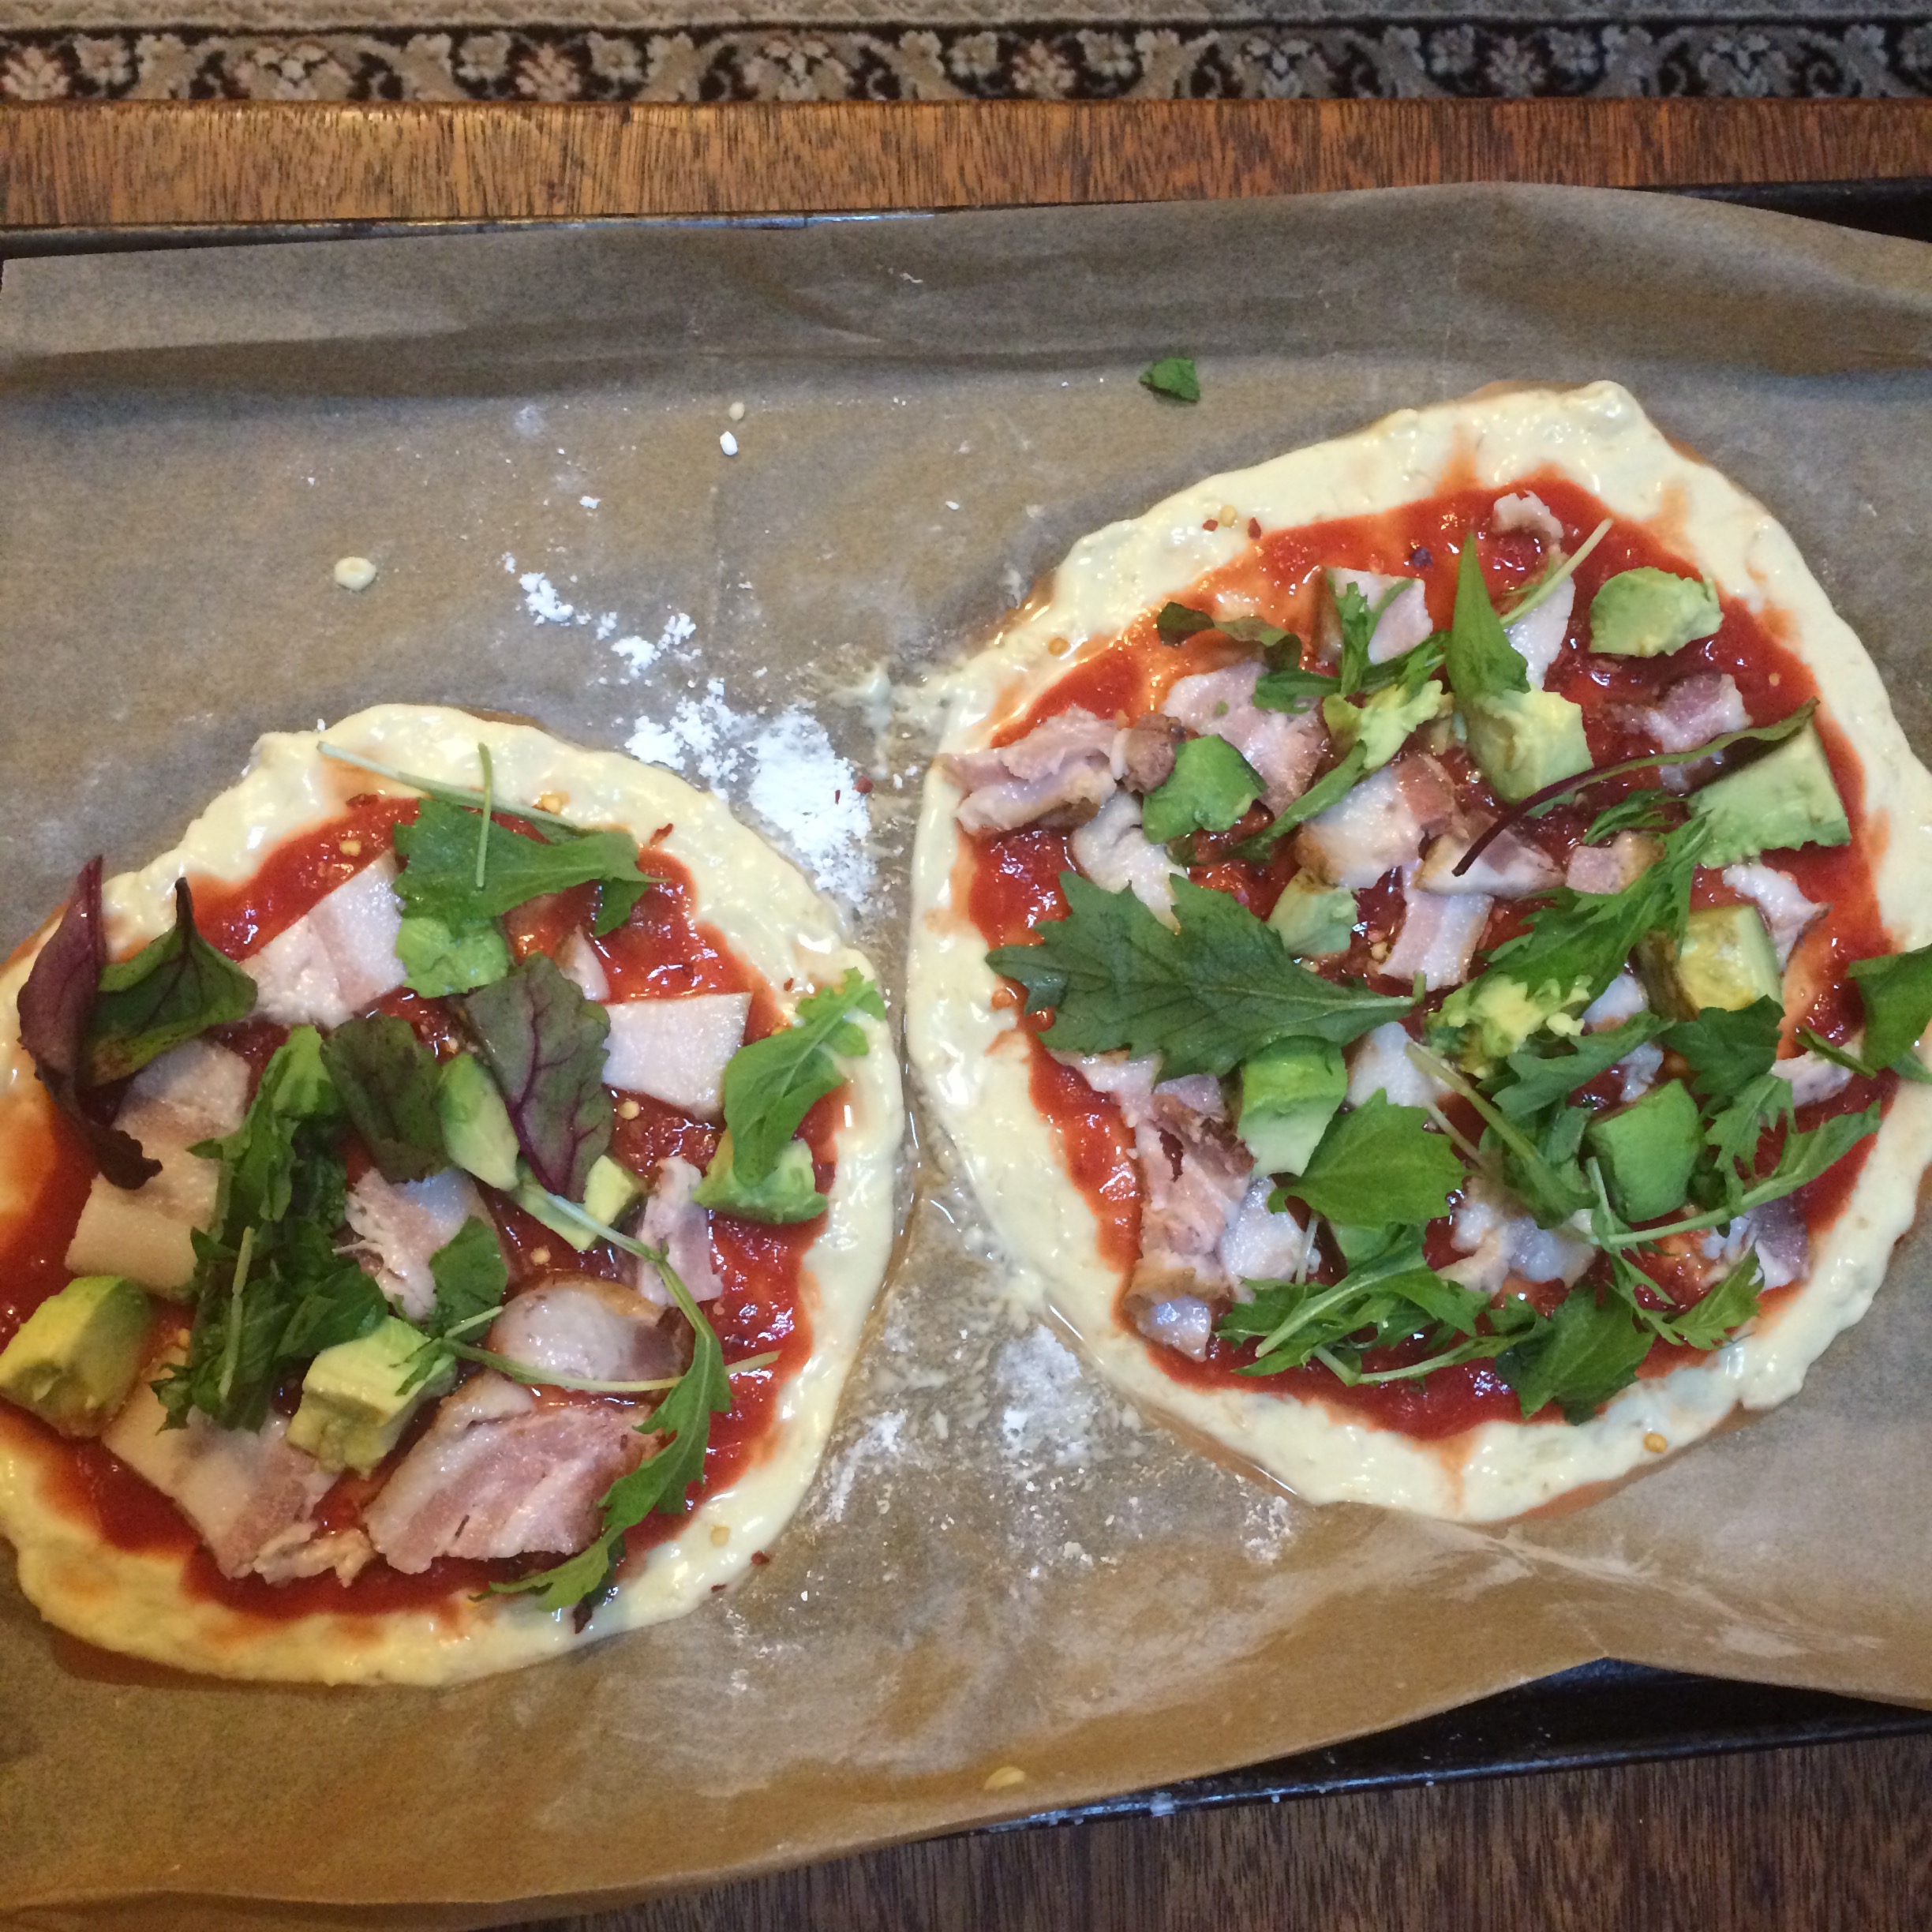 Two small pizza crusts with bacon pieces, leafy vegetables, avocado cubes, and diced tomatoes in sauce, laying on parchment paper before baking.